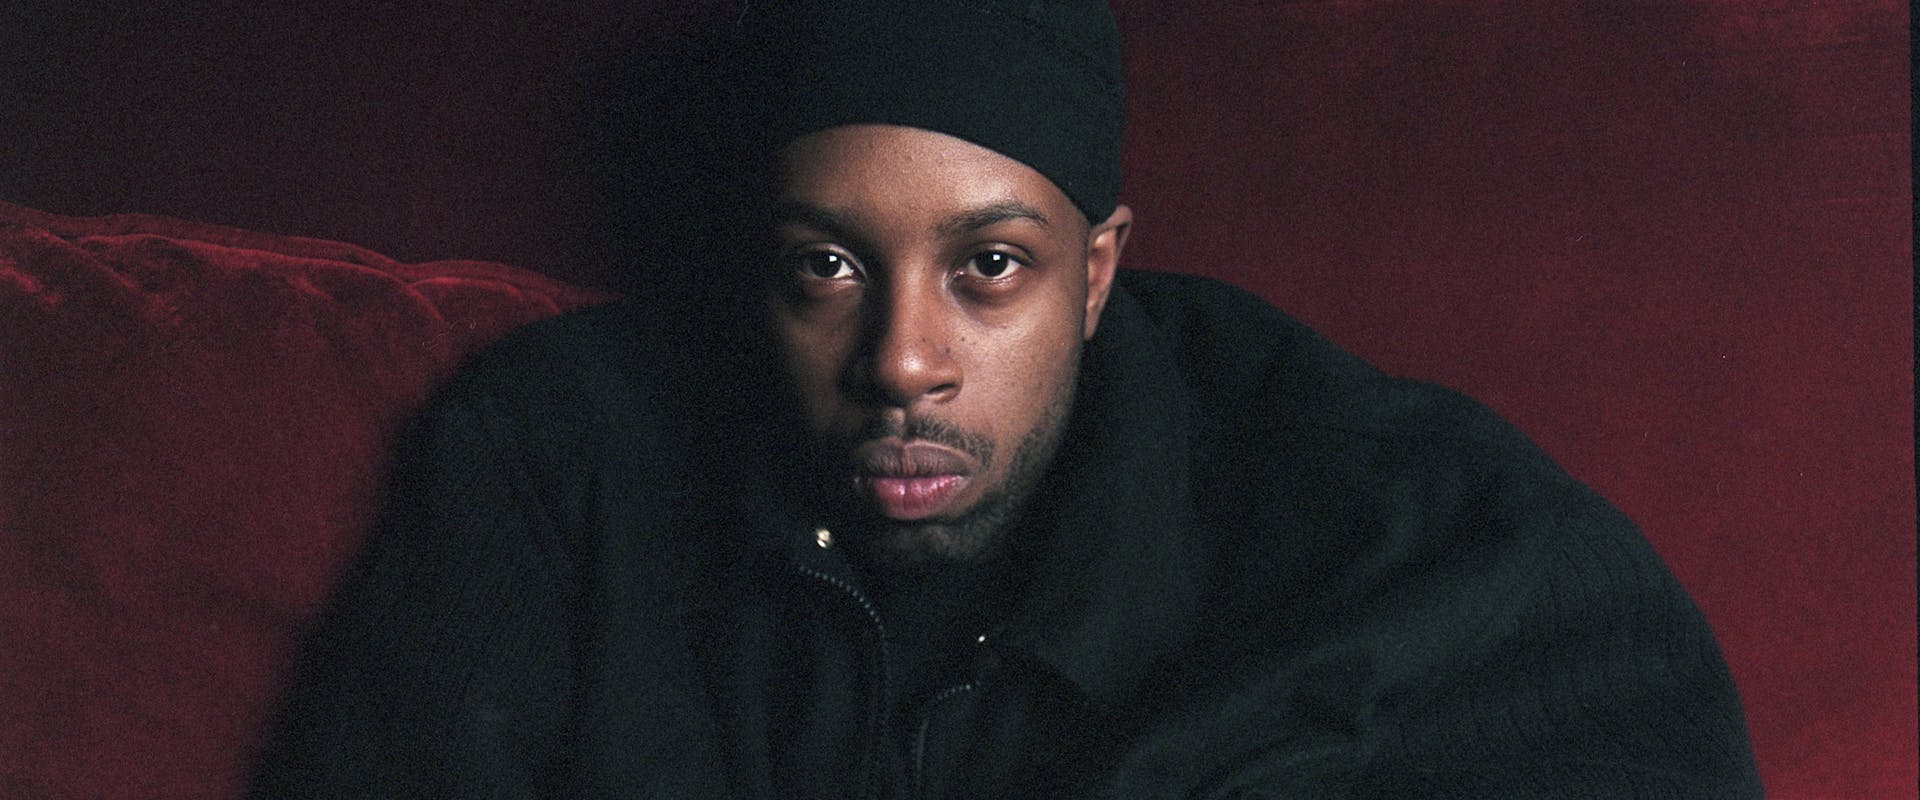 Hip hop artist J Dilla of the group Slum Village photographed at the Key Club in 2000 in West Hollywood, California. 